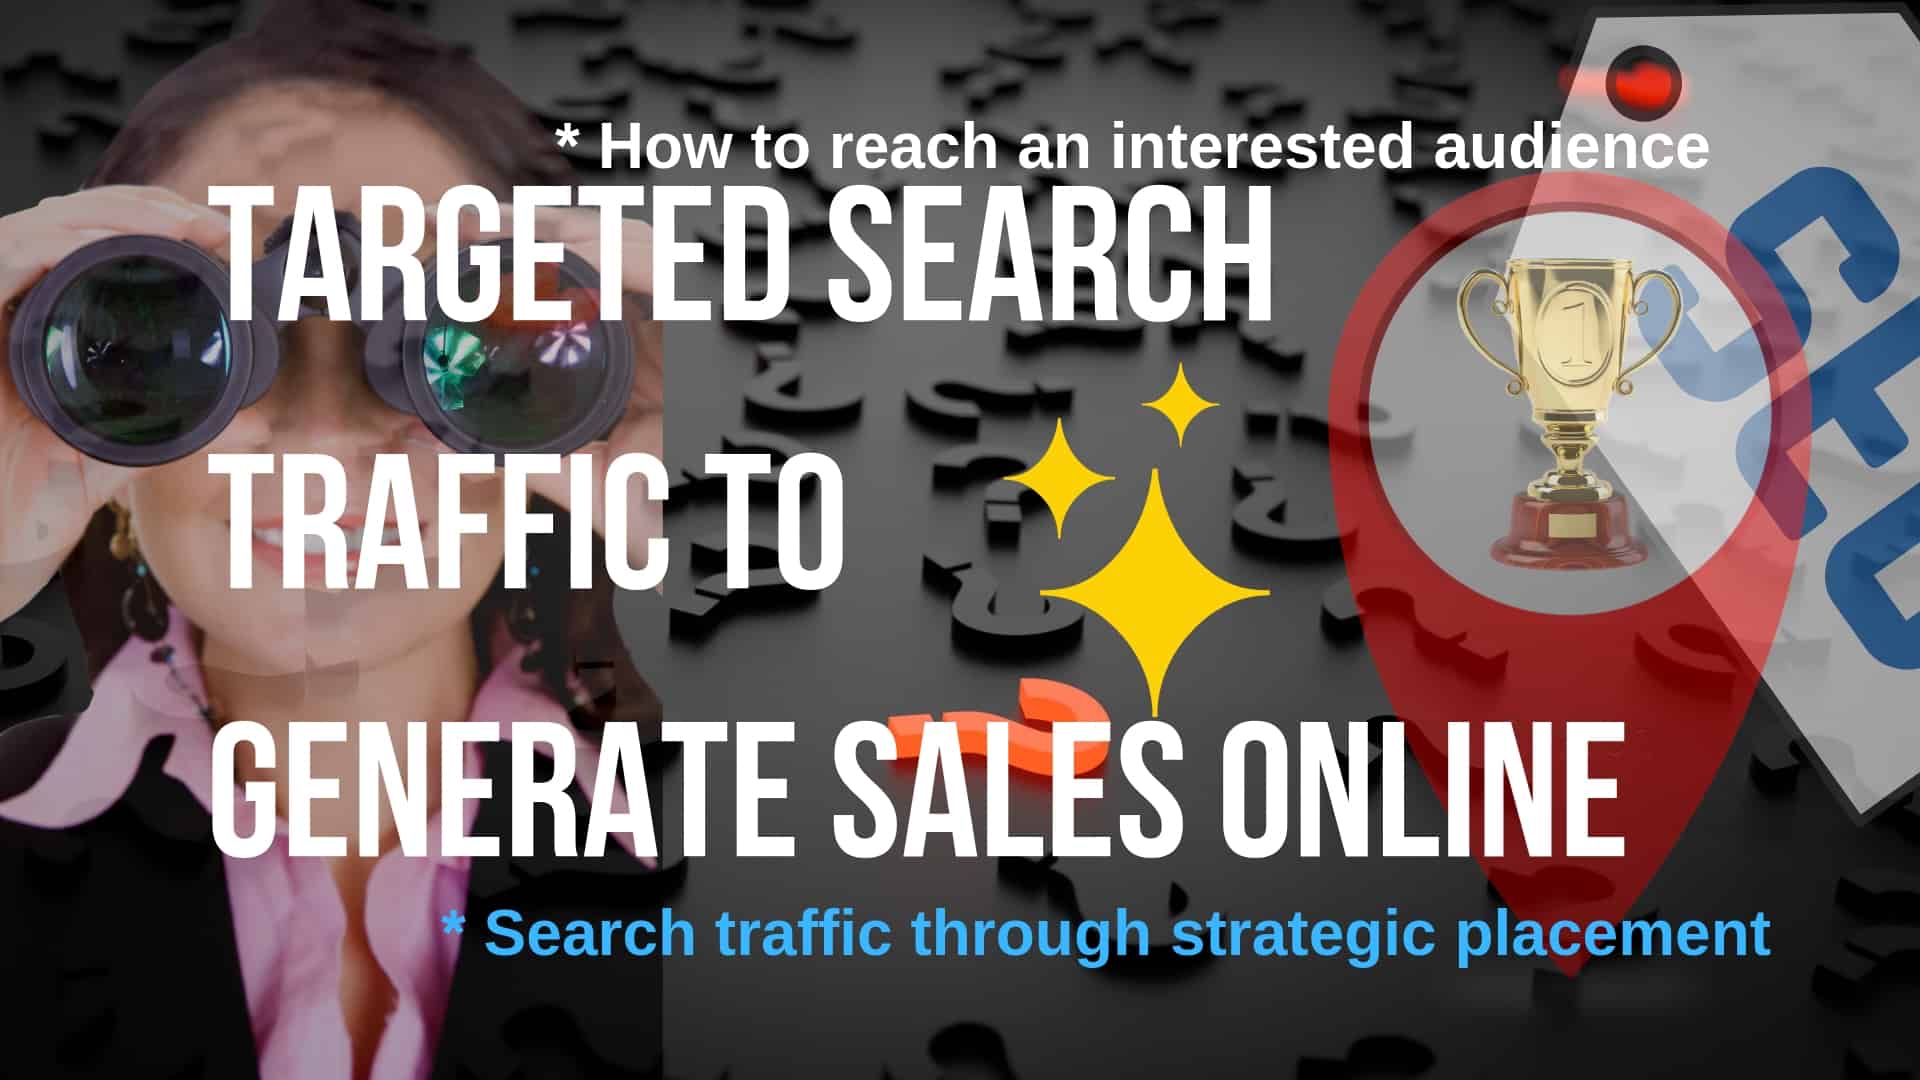 Targeted search traffic to generate sales online